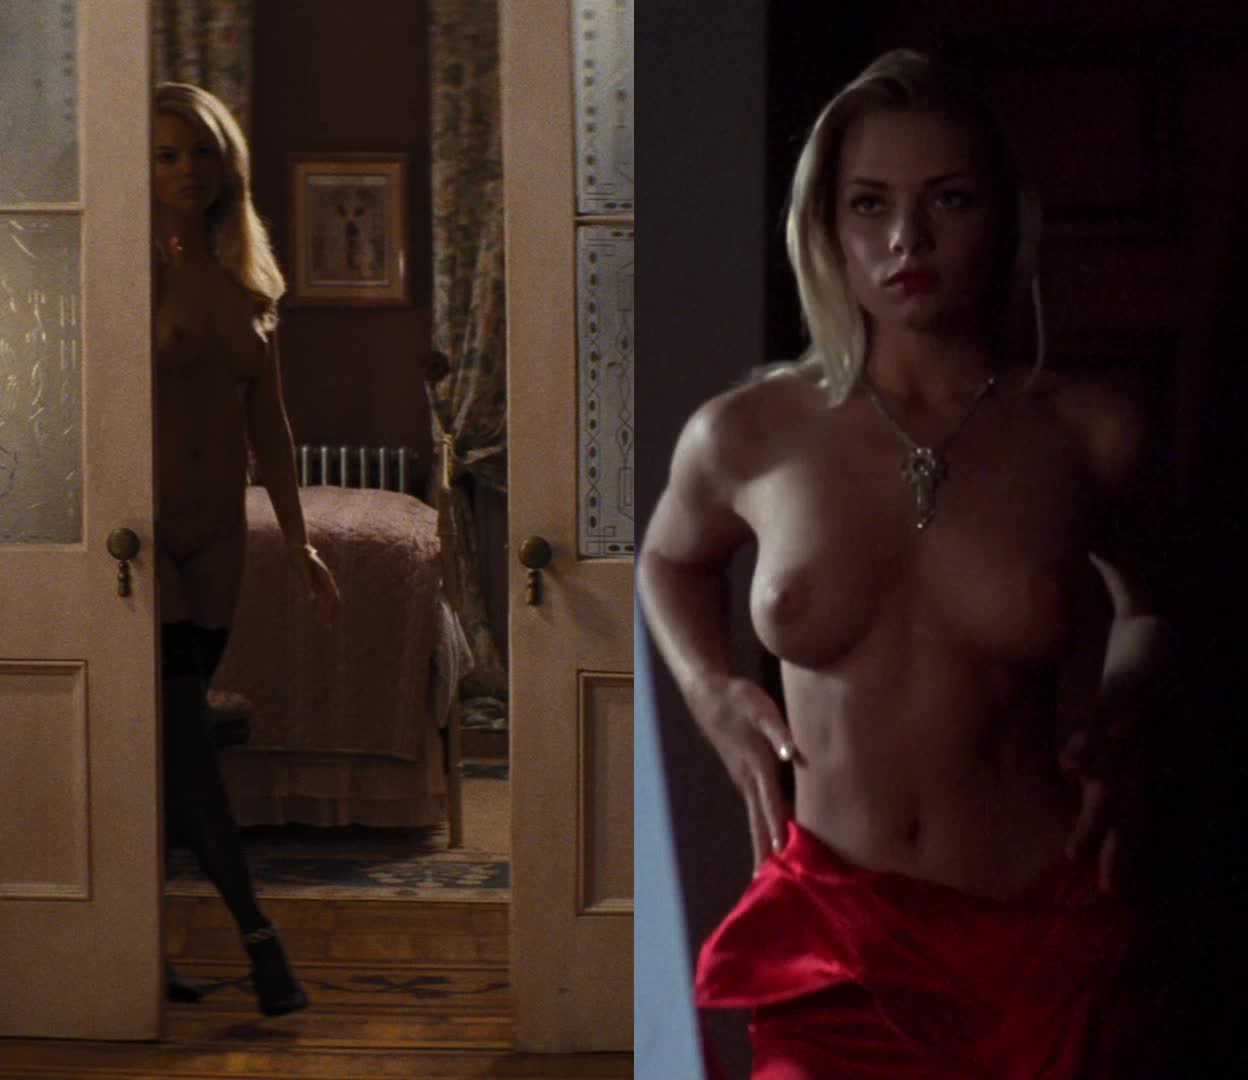 dawne dawes recommends margot robbie frontal nude pic